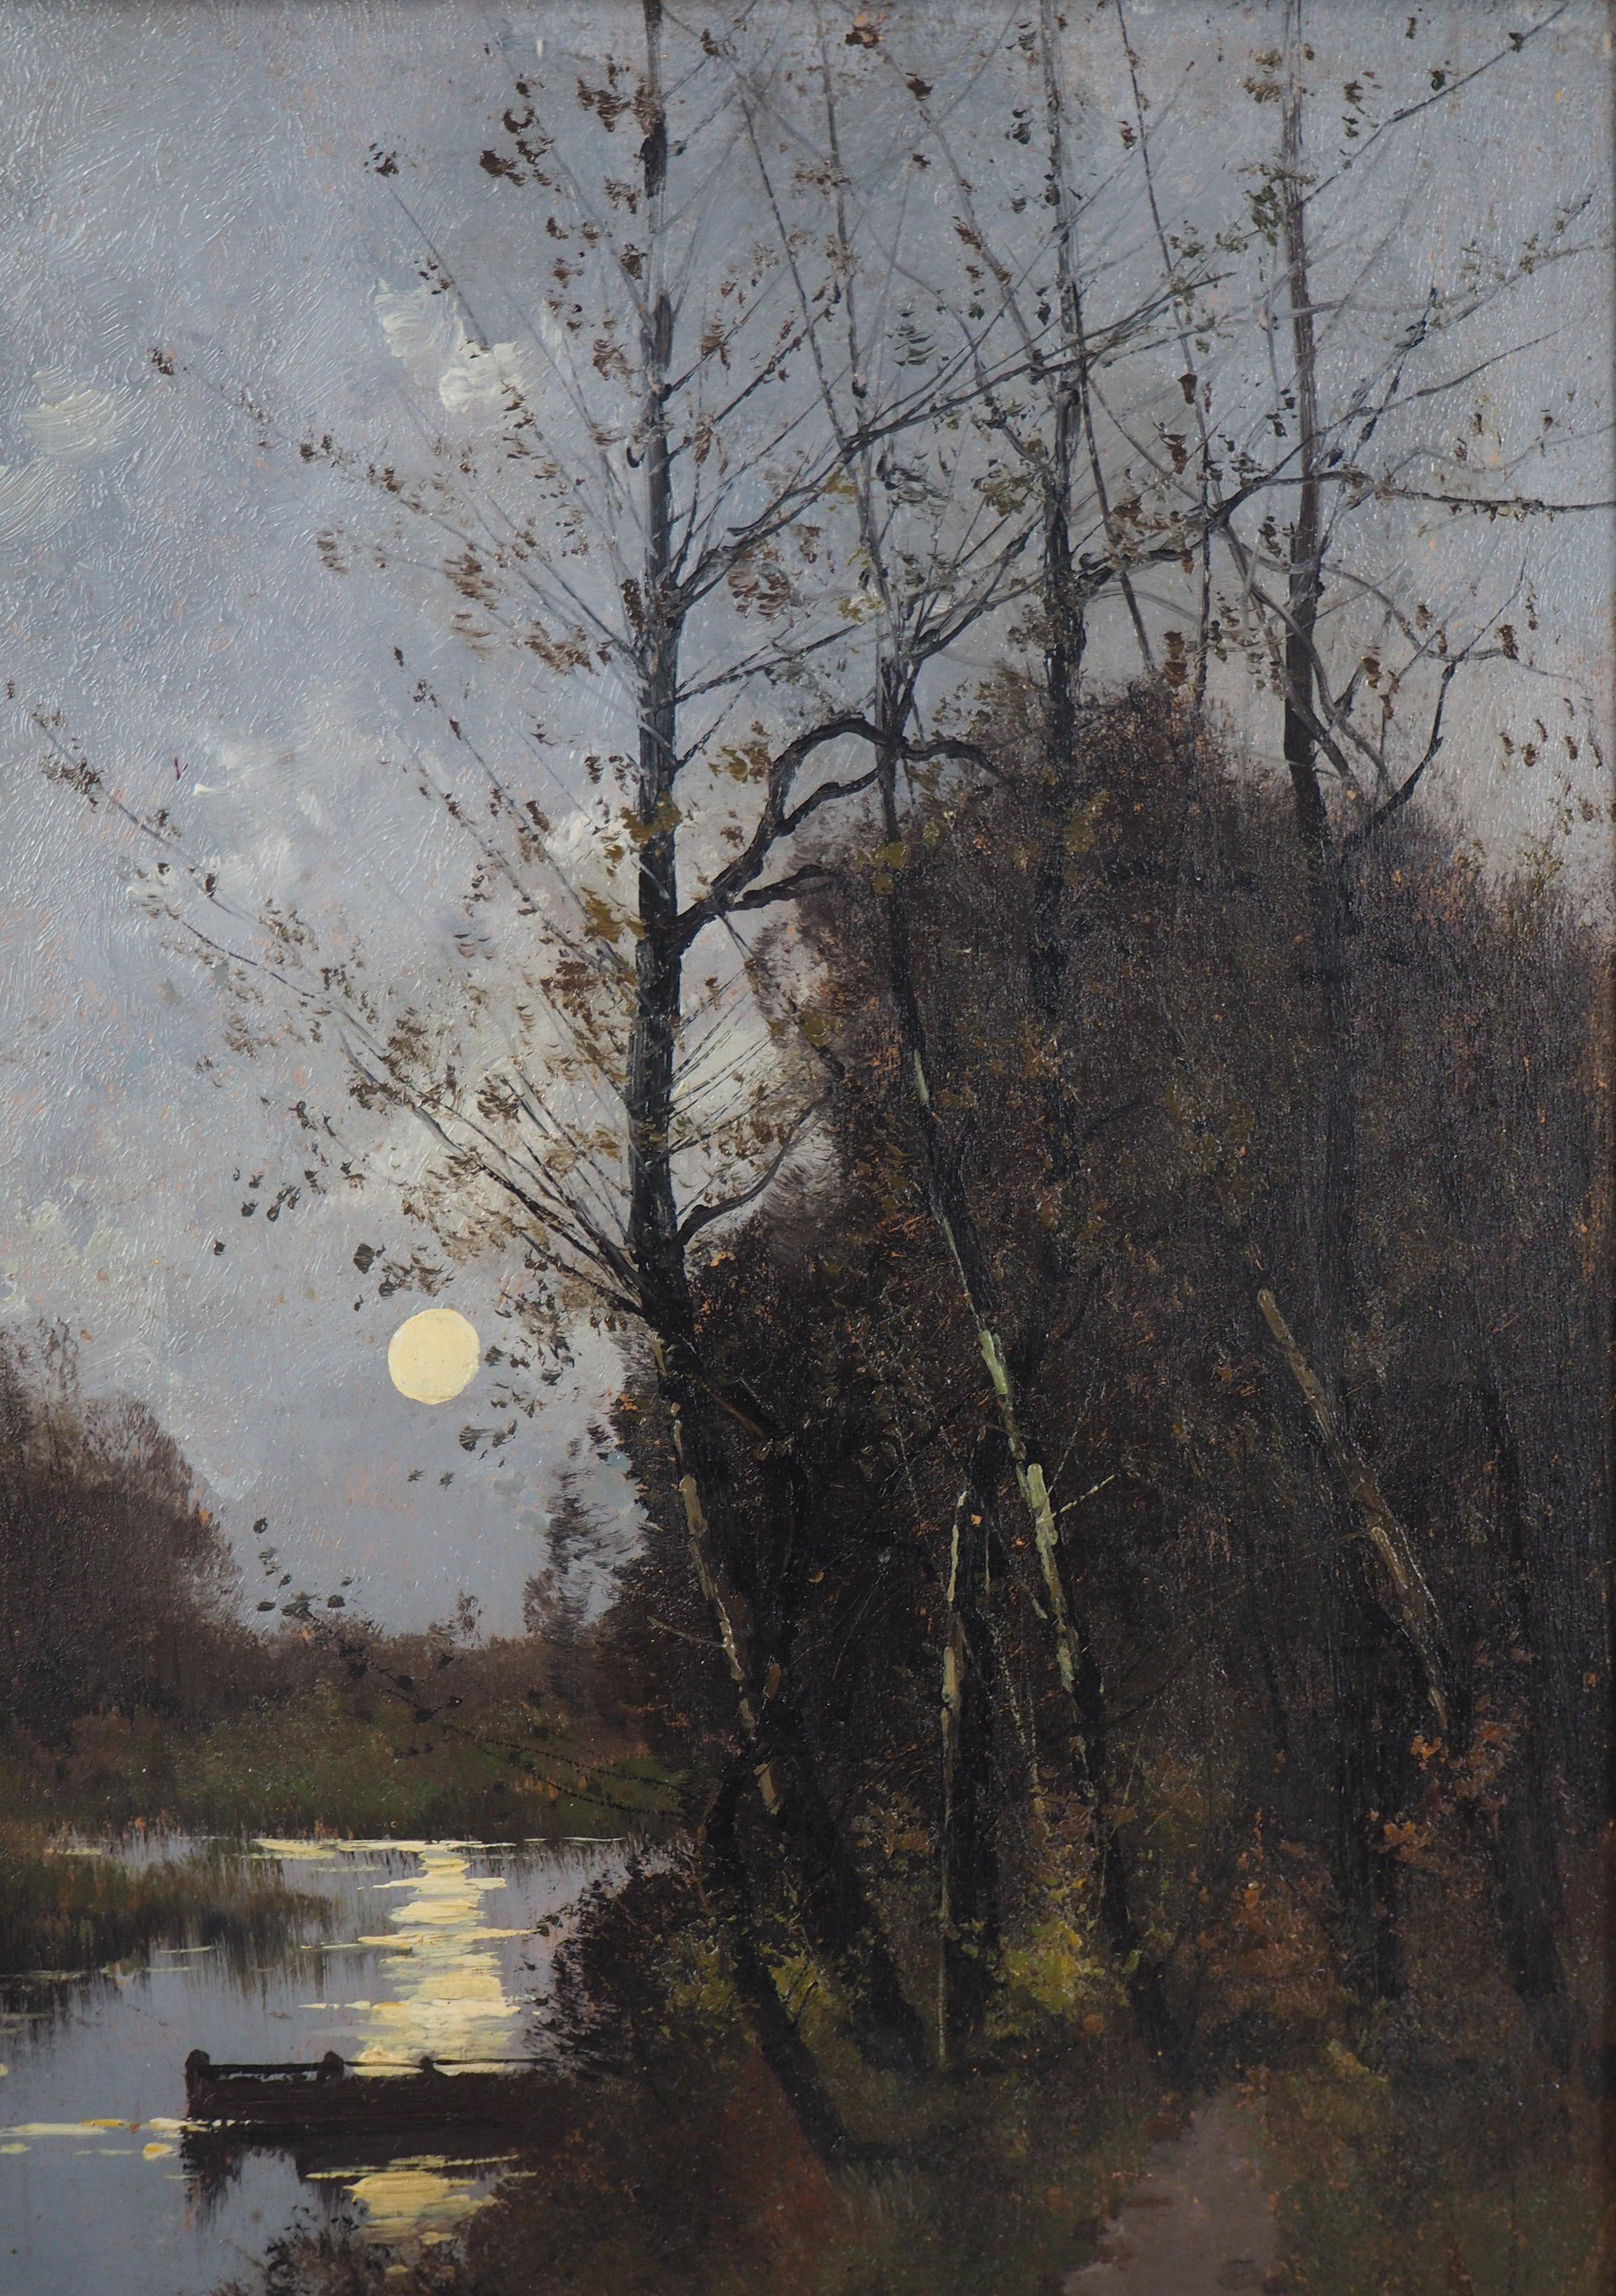 River at the Moonlight - Original painting on board - Signed - Post-Impressionist Painting by Eugene Galien-Laloue